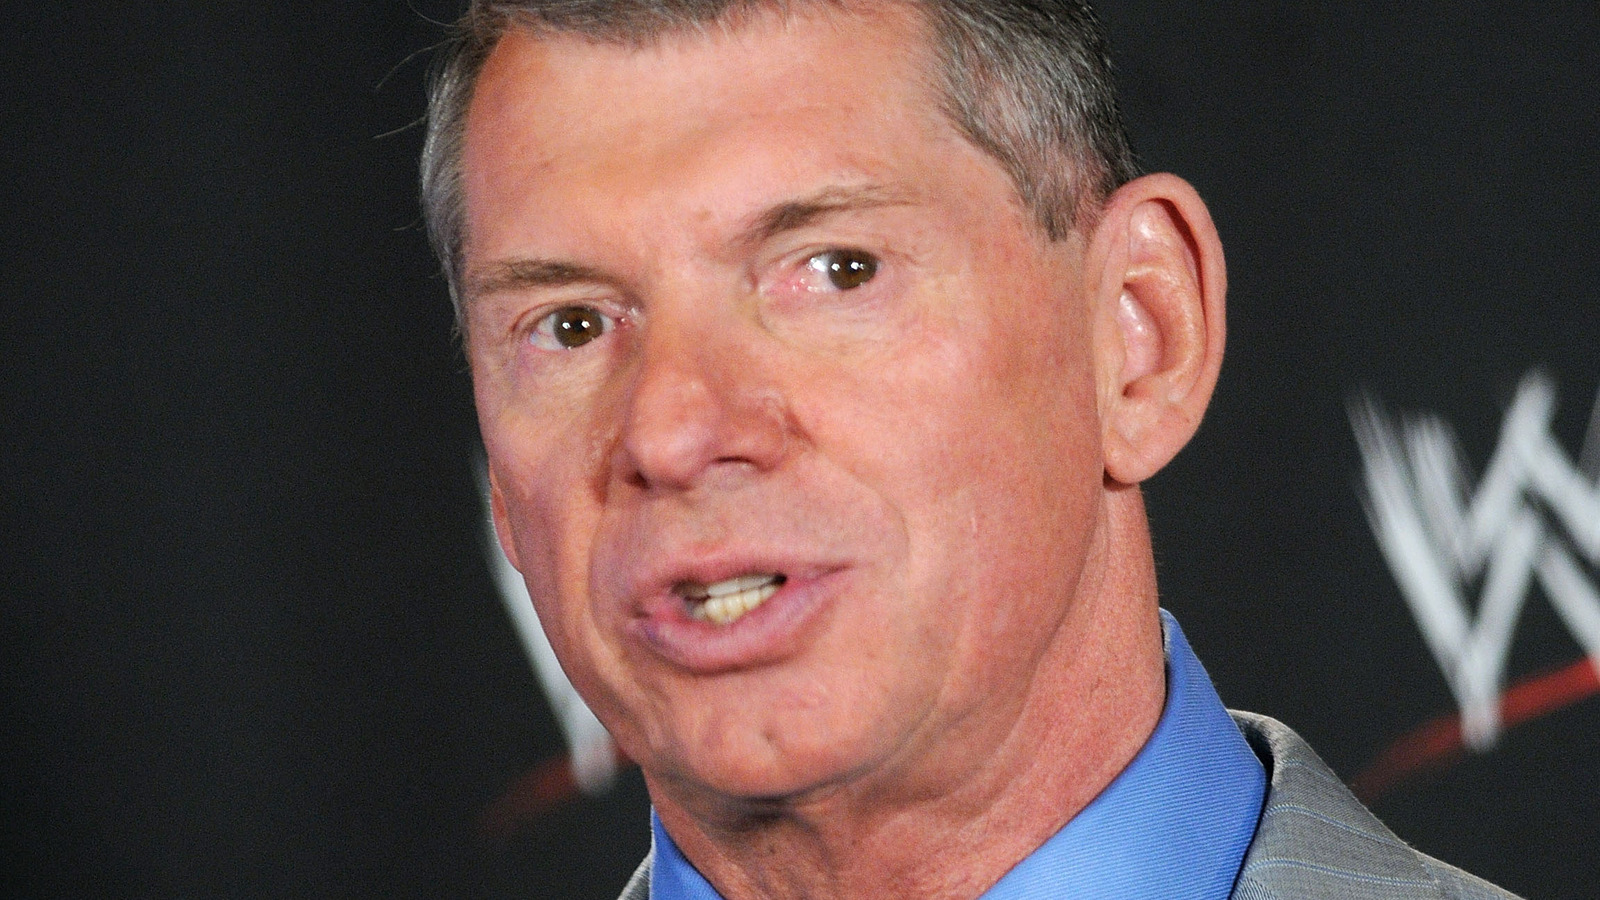 former-wwe-star-describes-experience-of-working-for-vince-mcmahon